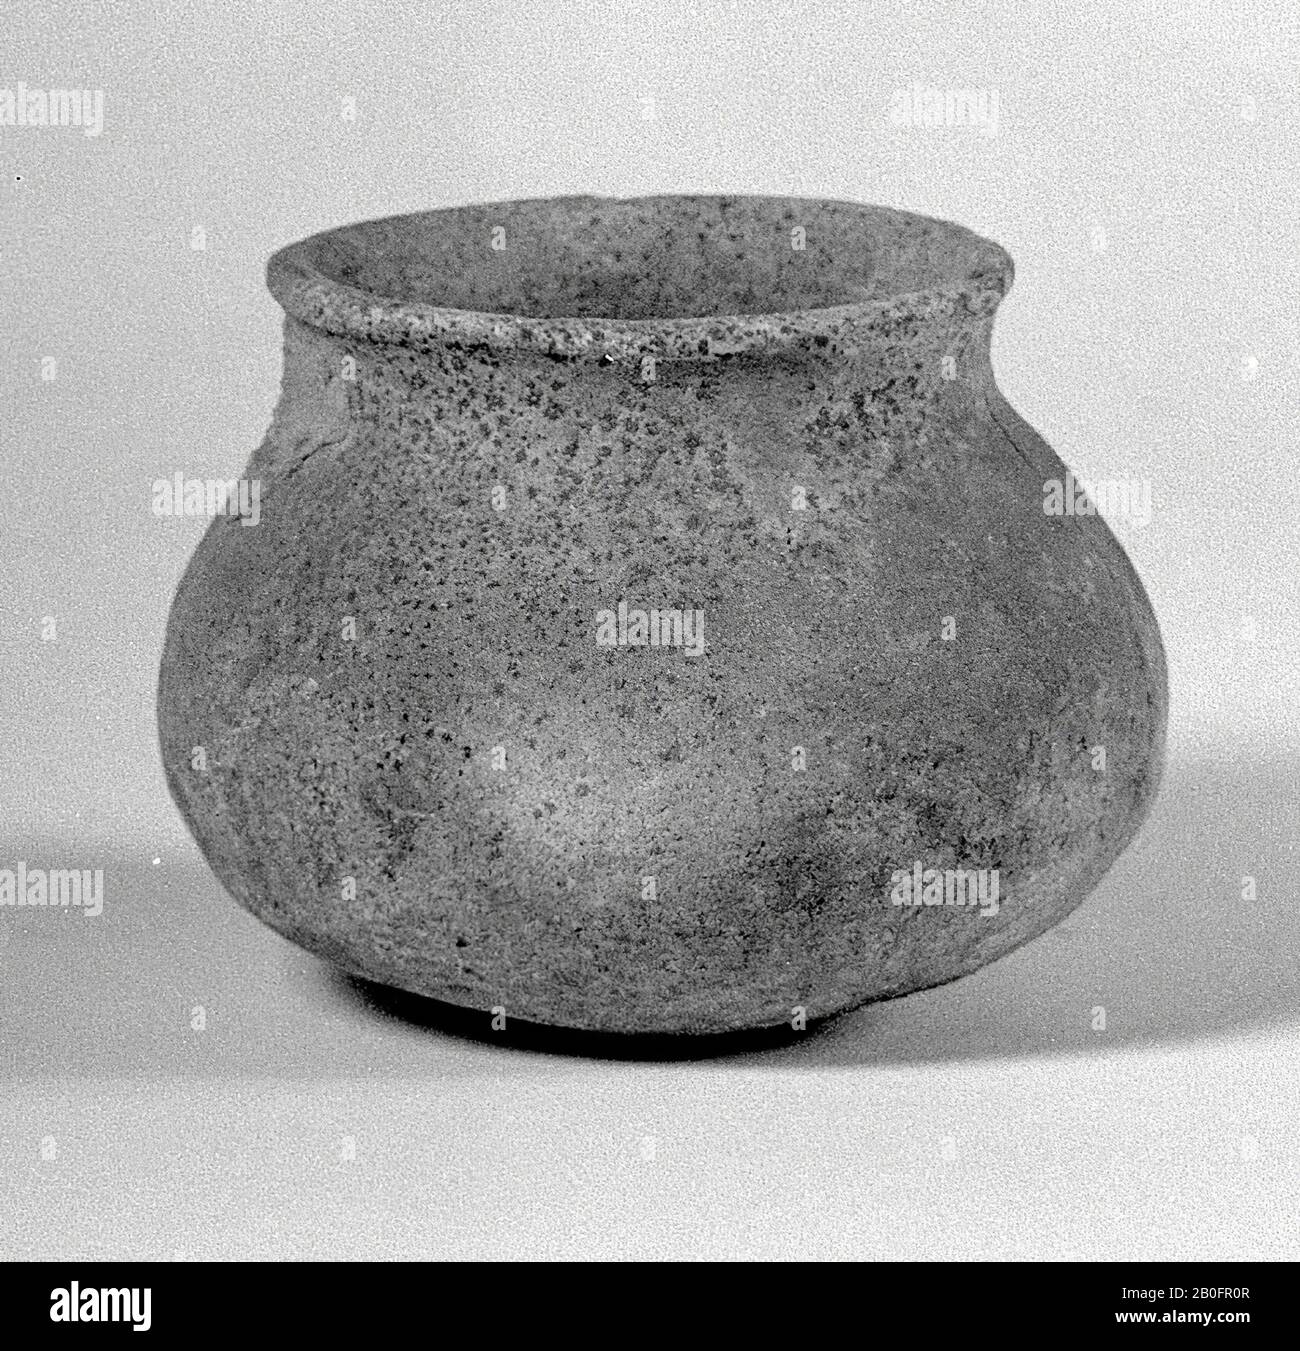 Ball pot of blue-gray Paffrath earthenware. 2 opposite vertical bursts from the edge downwards, adhered earth on the shoulder., Pot, ball pot, pottery (Paffrath), h: 9 cm, diam: 11 cm, lmea Stock Photo